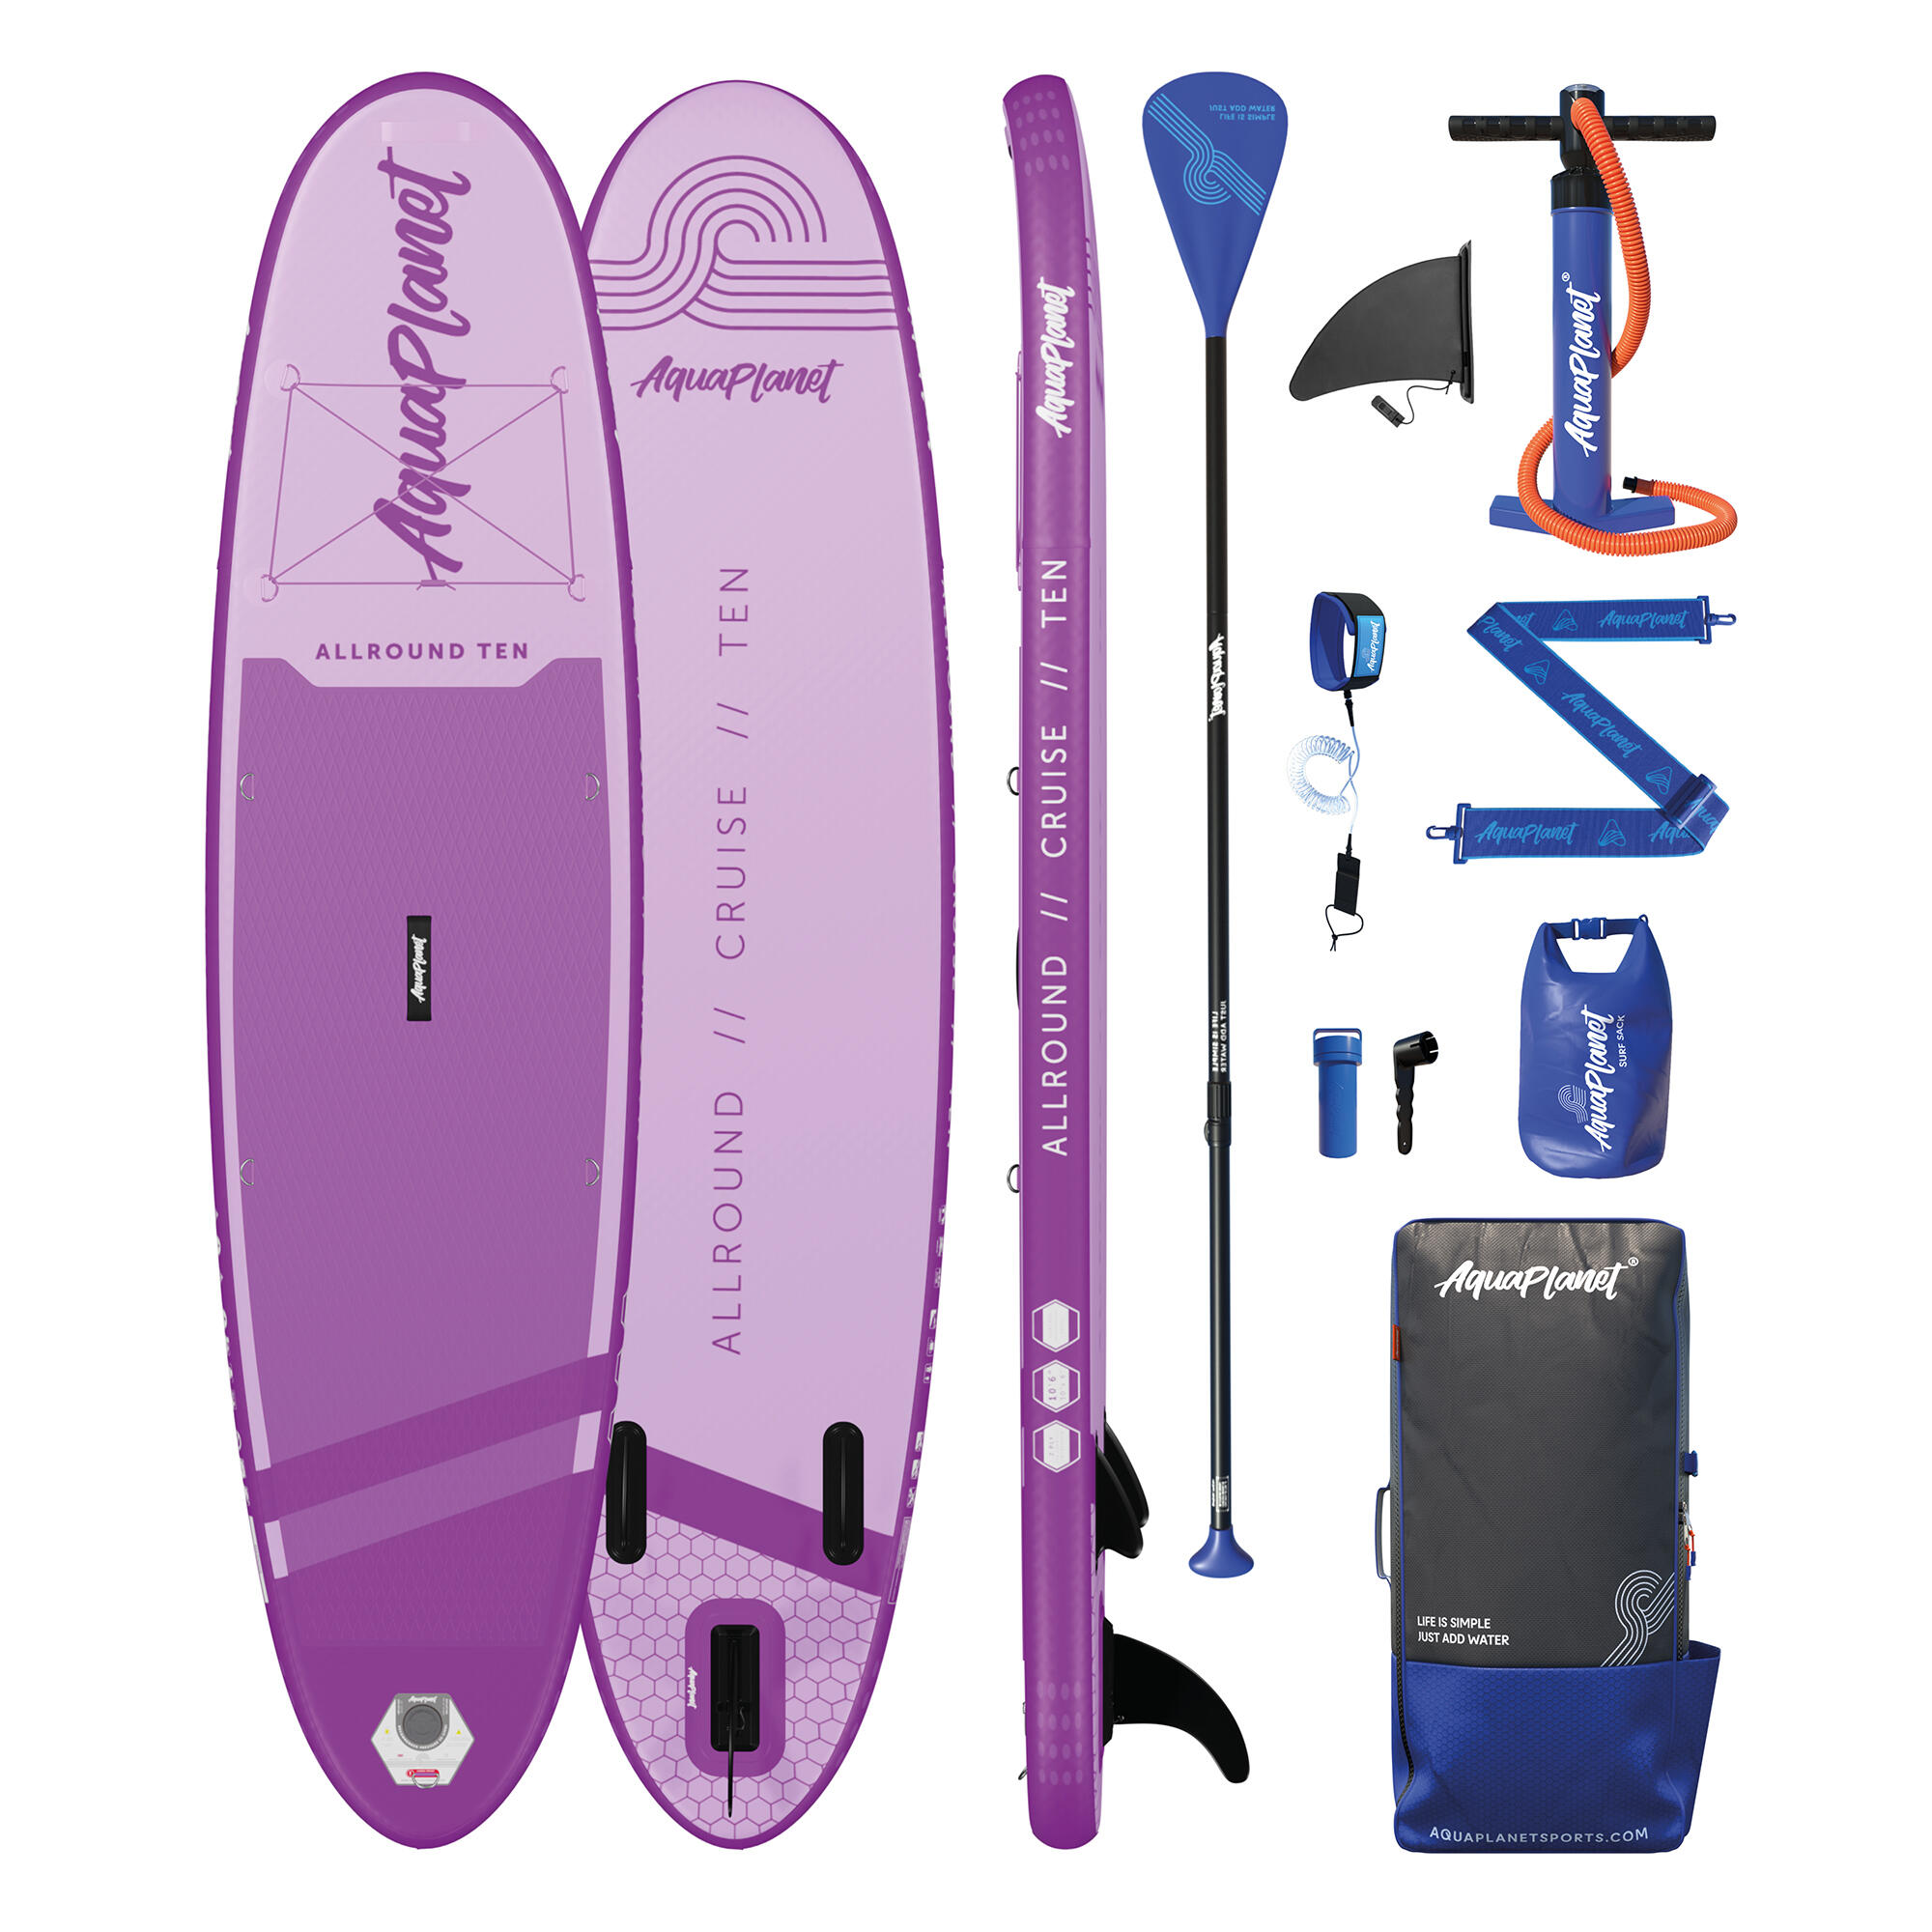 AQUAPLANET Aquaplanet ALLROUND TEN 10’ Inflatable Paddle Board Package - Purple